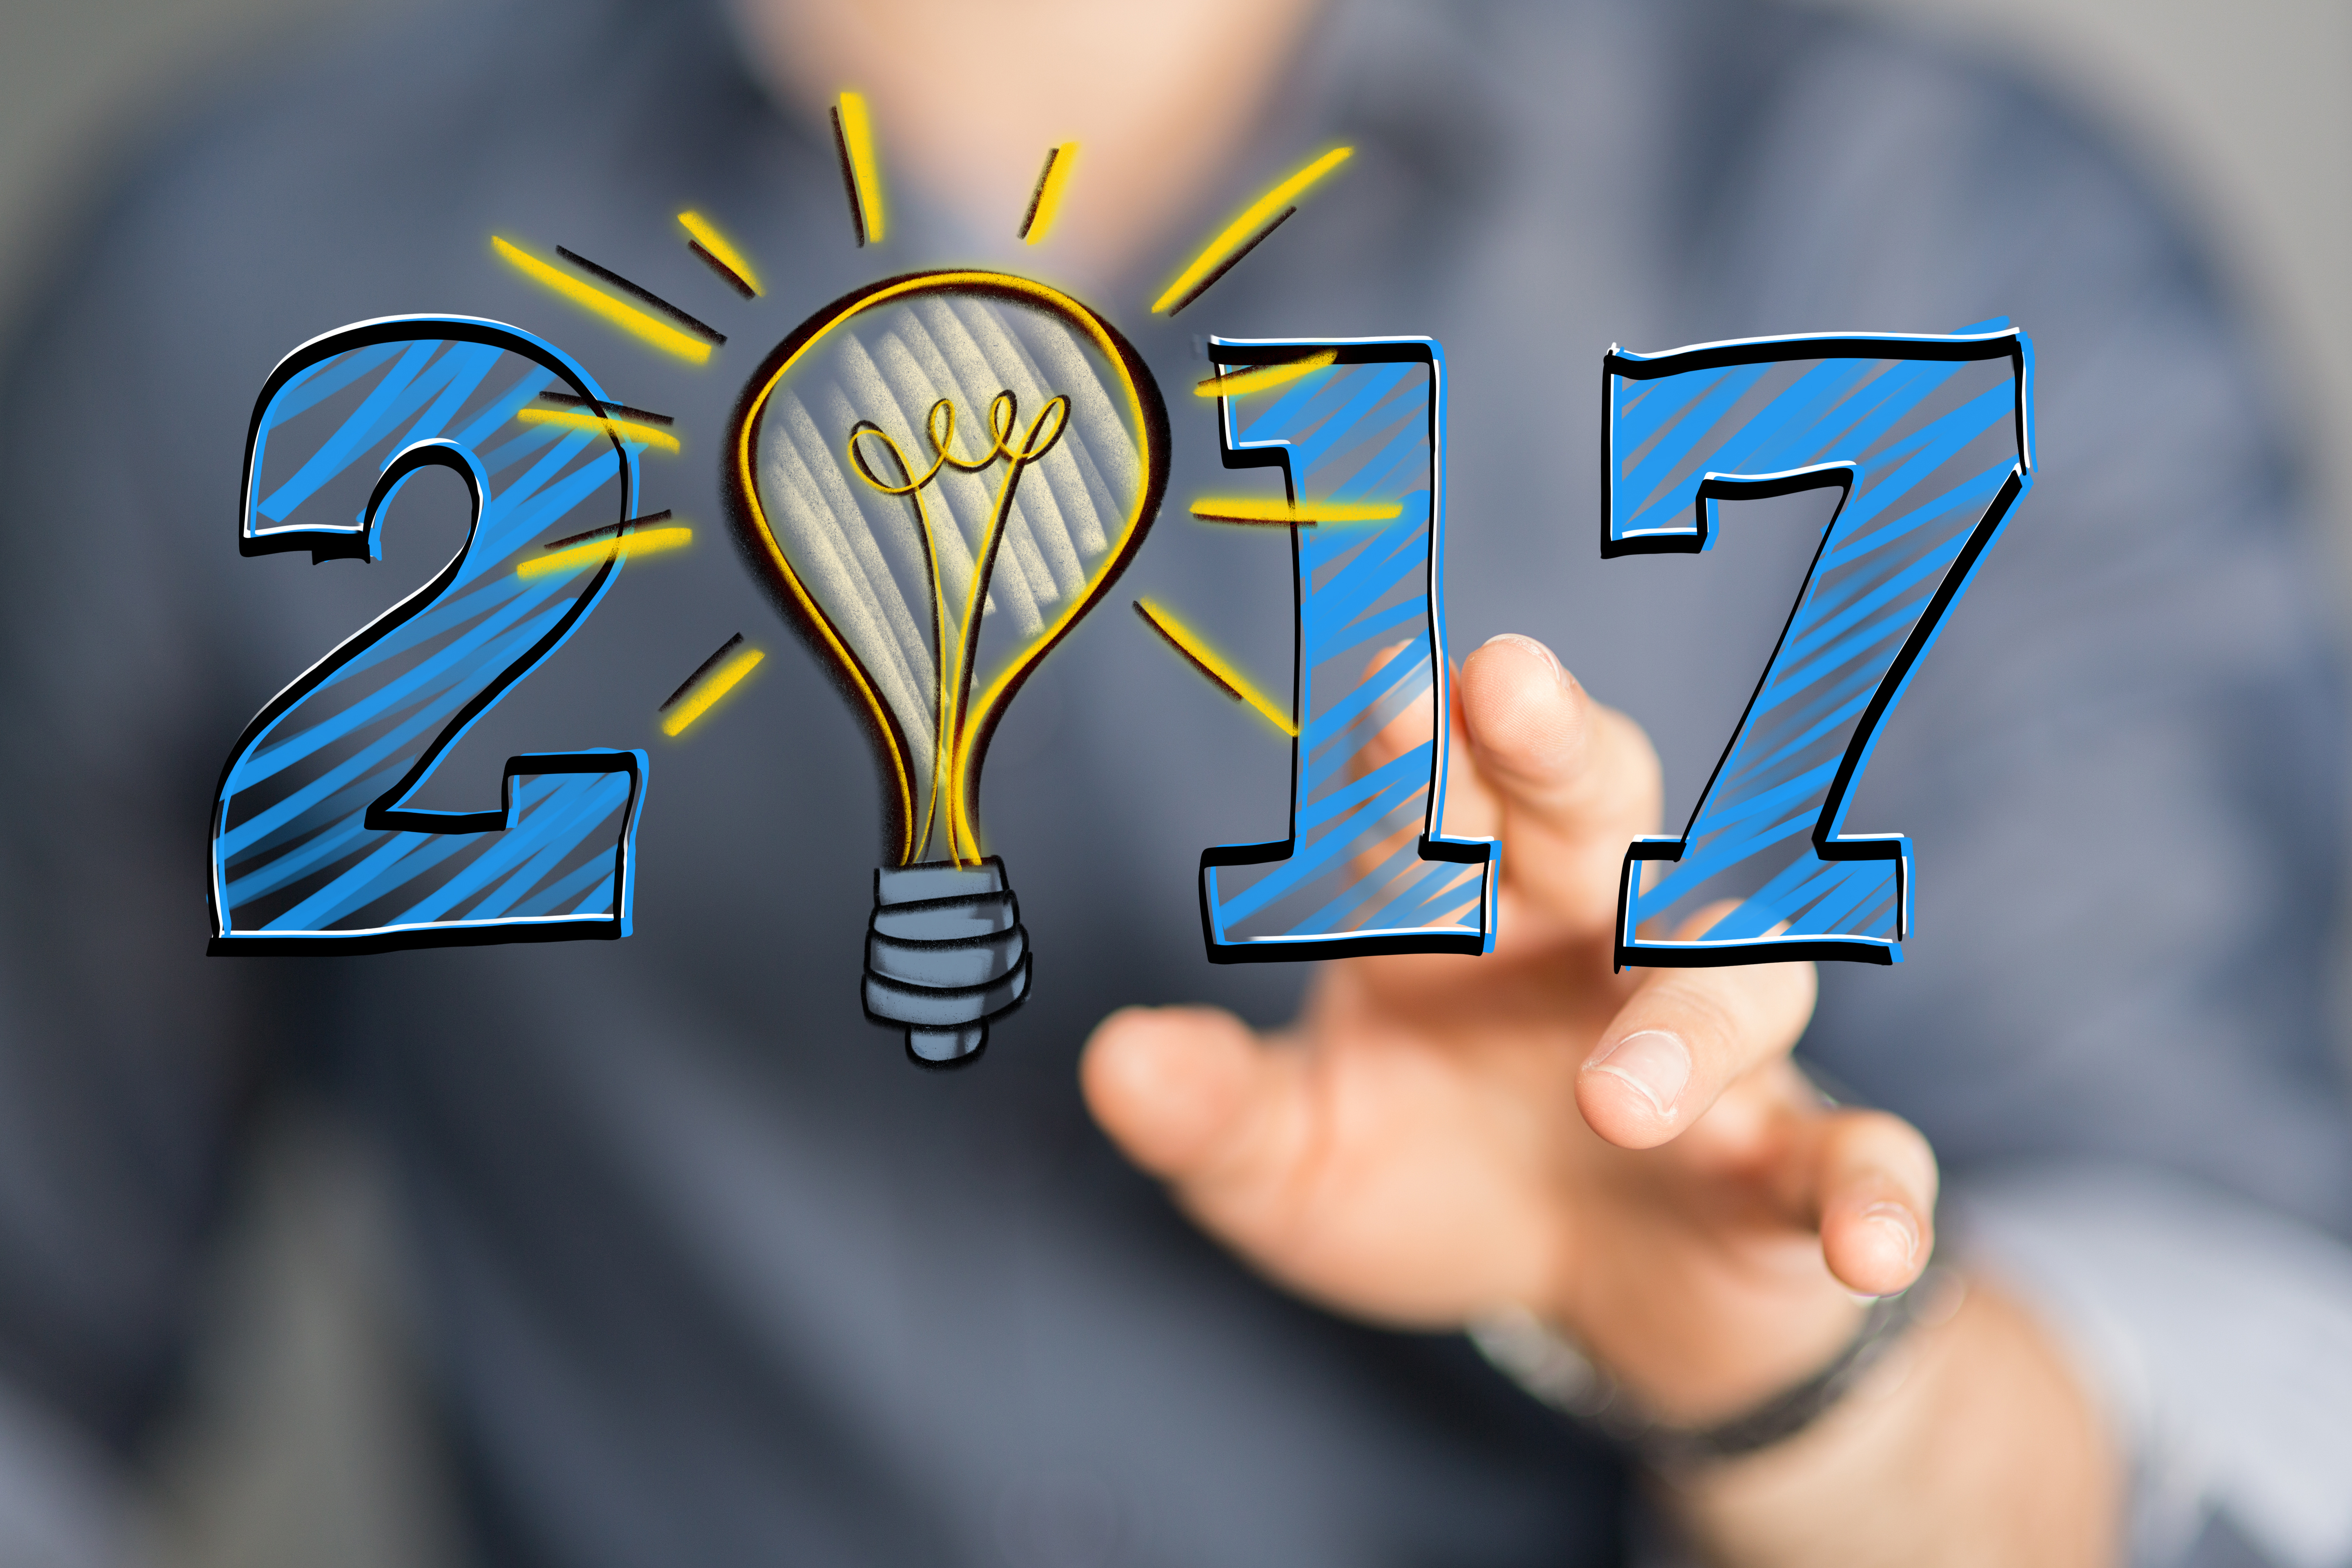 Tech trends for 2017: 12 predictions from Tibus